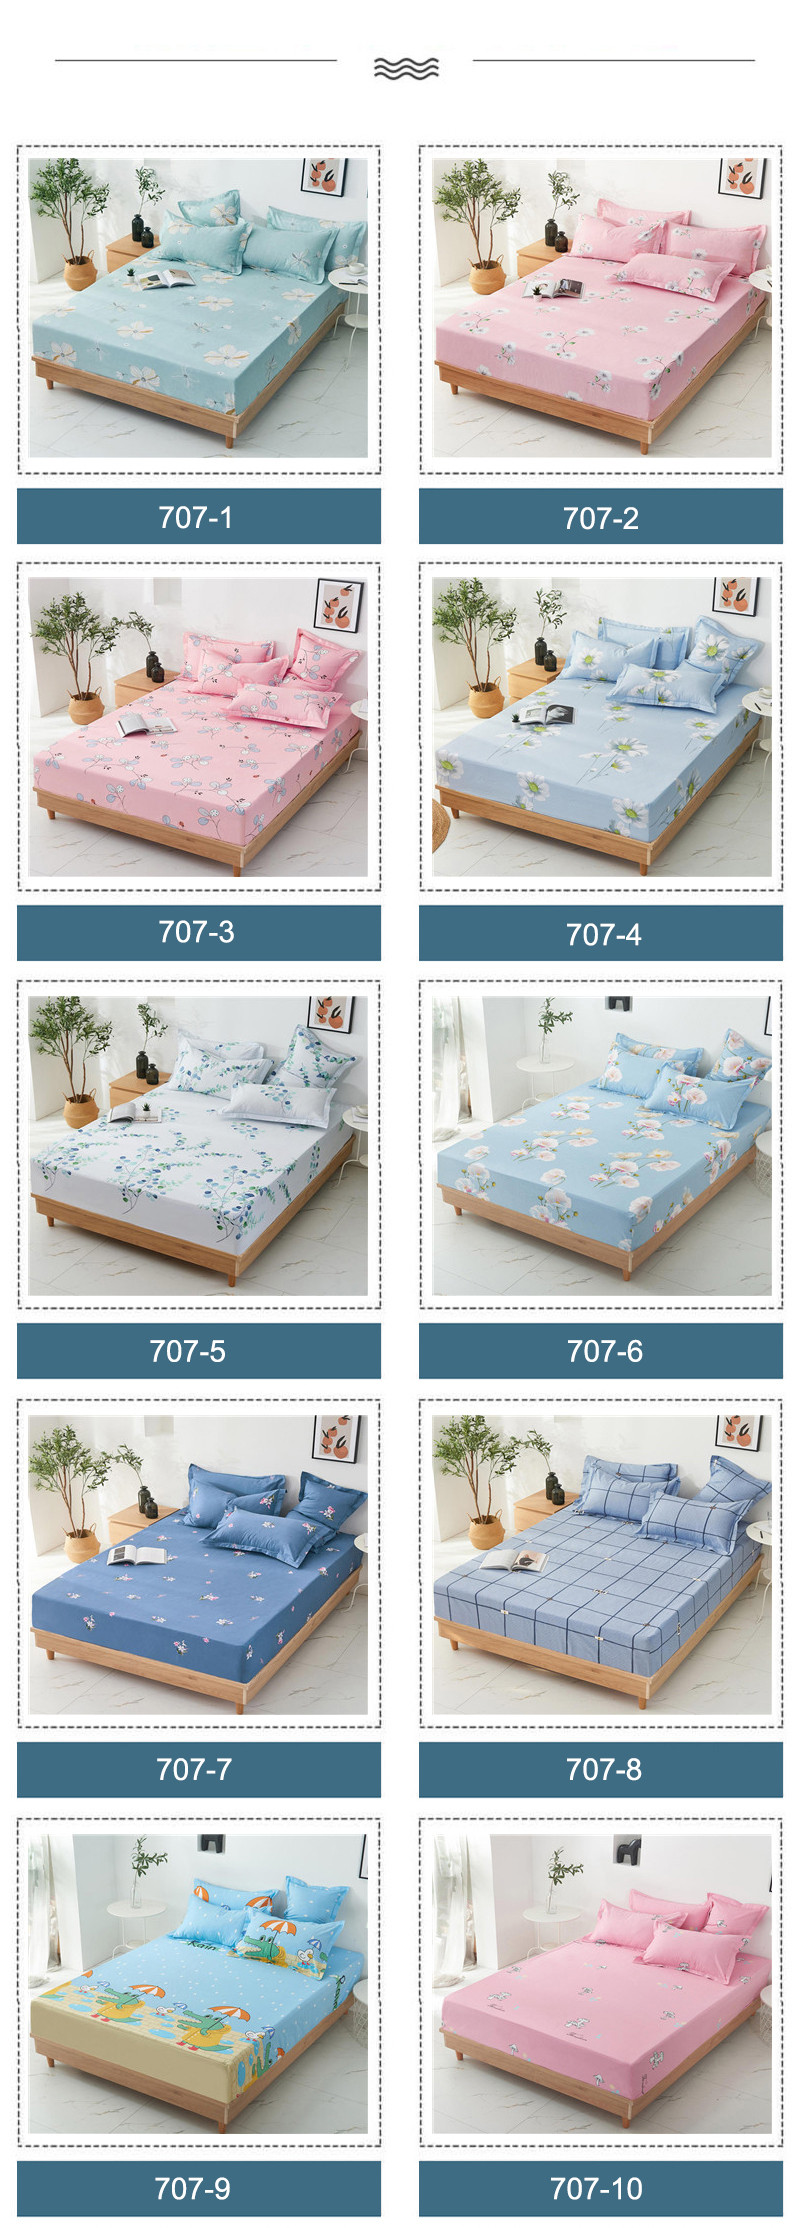 For Double Bed Deep Pockets Wholesale